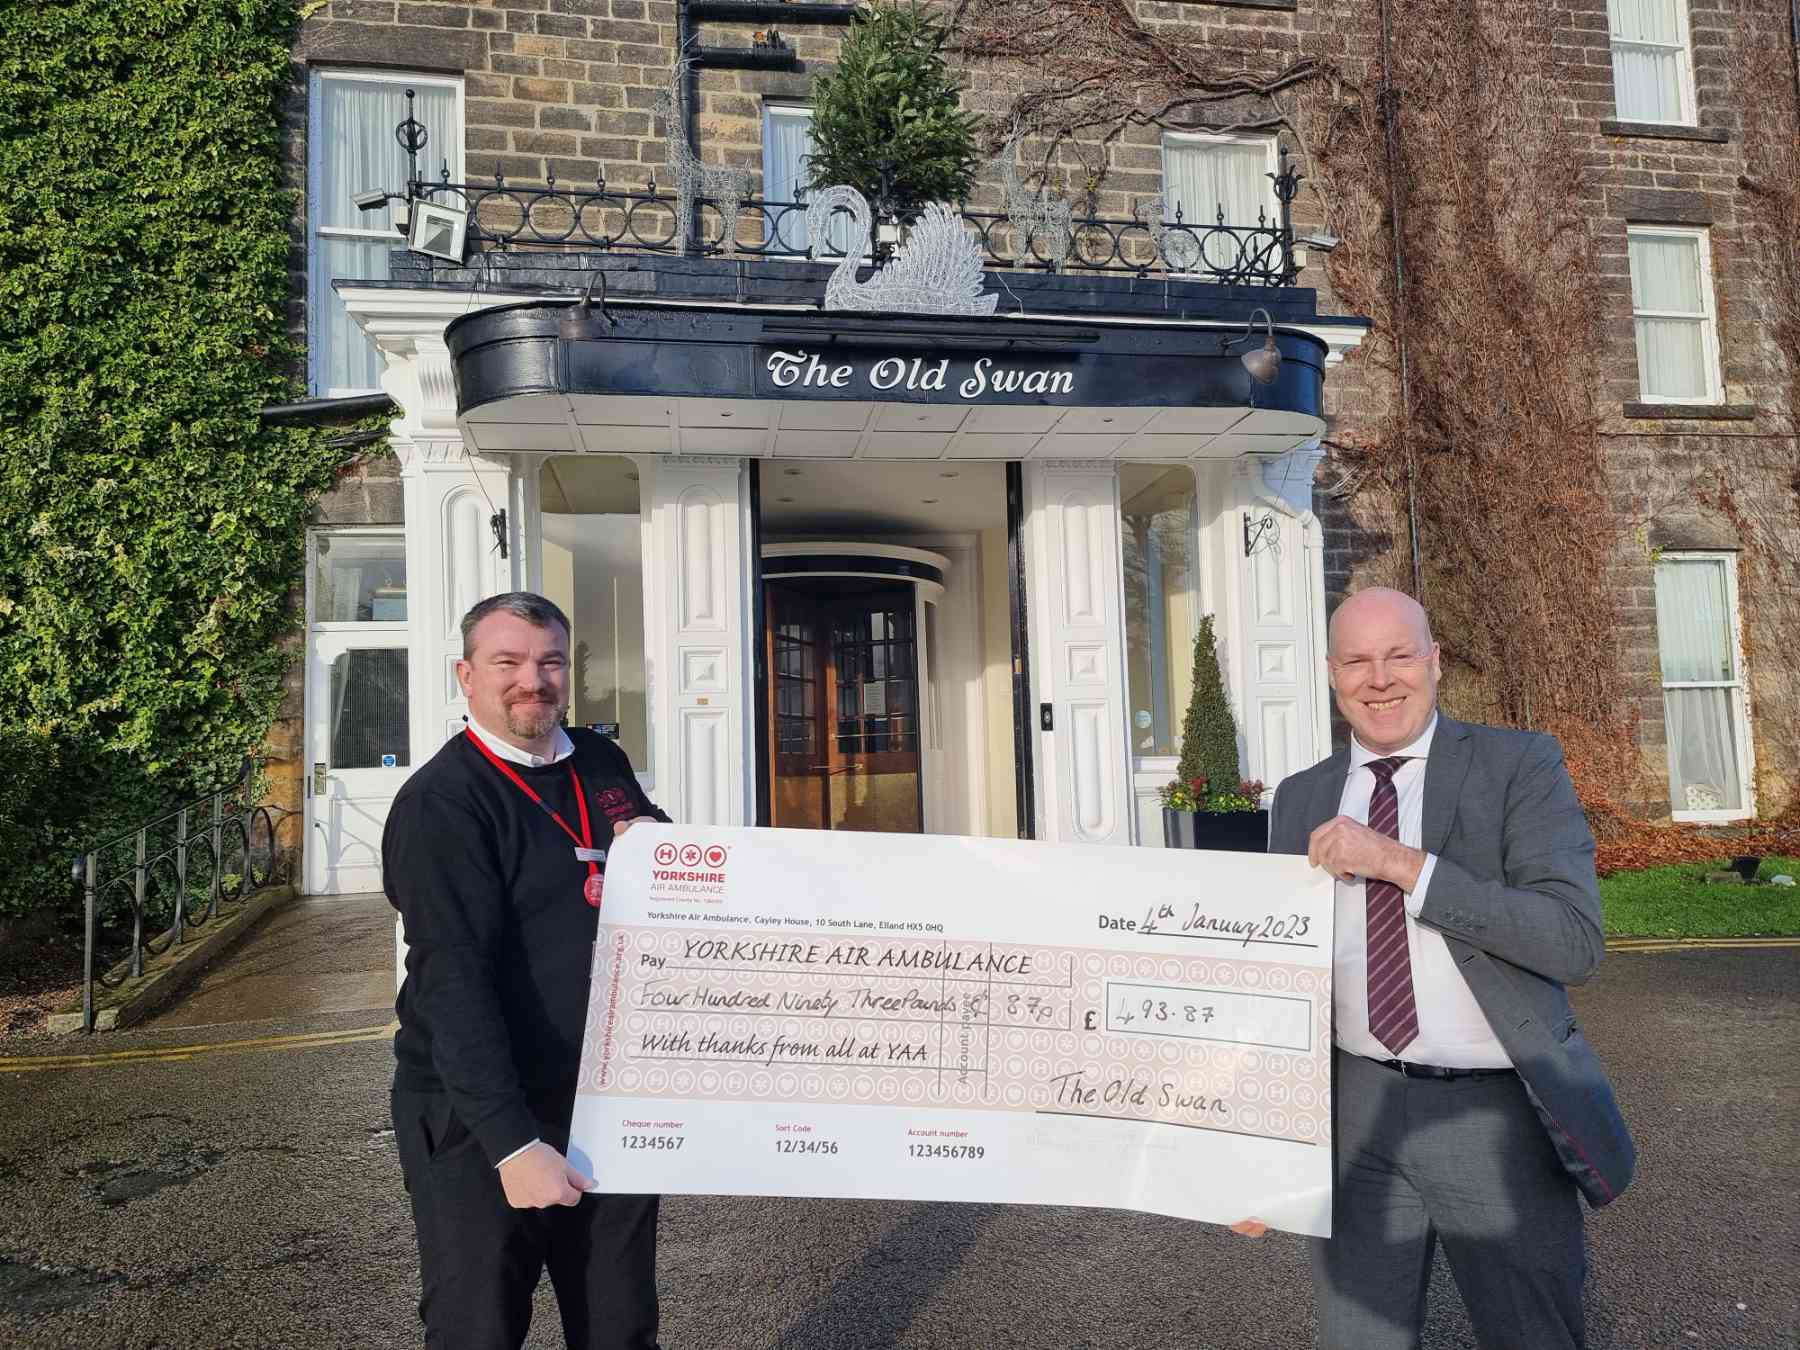 David Ritson General Manager at The Old Swan, presents a cheque for £493.87 to Jonathan Heeley, Regional Fundraiser at Yorkshire Air Ambulance